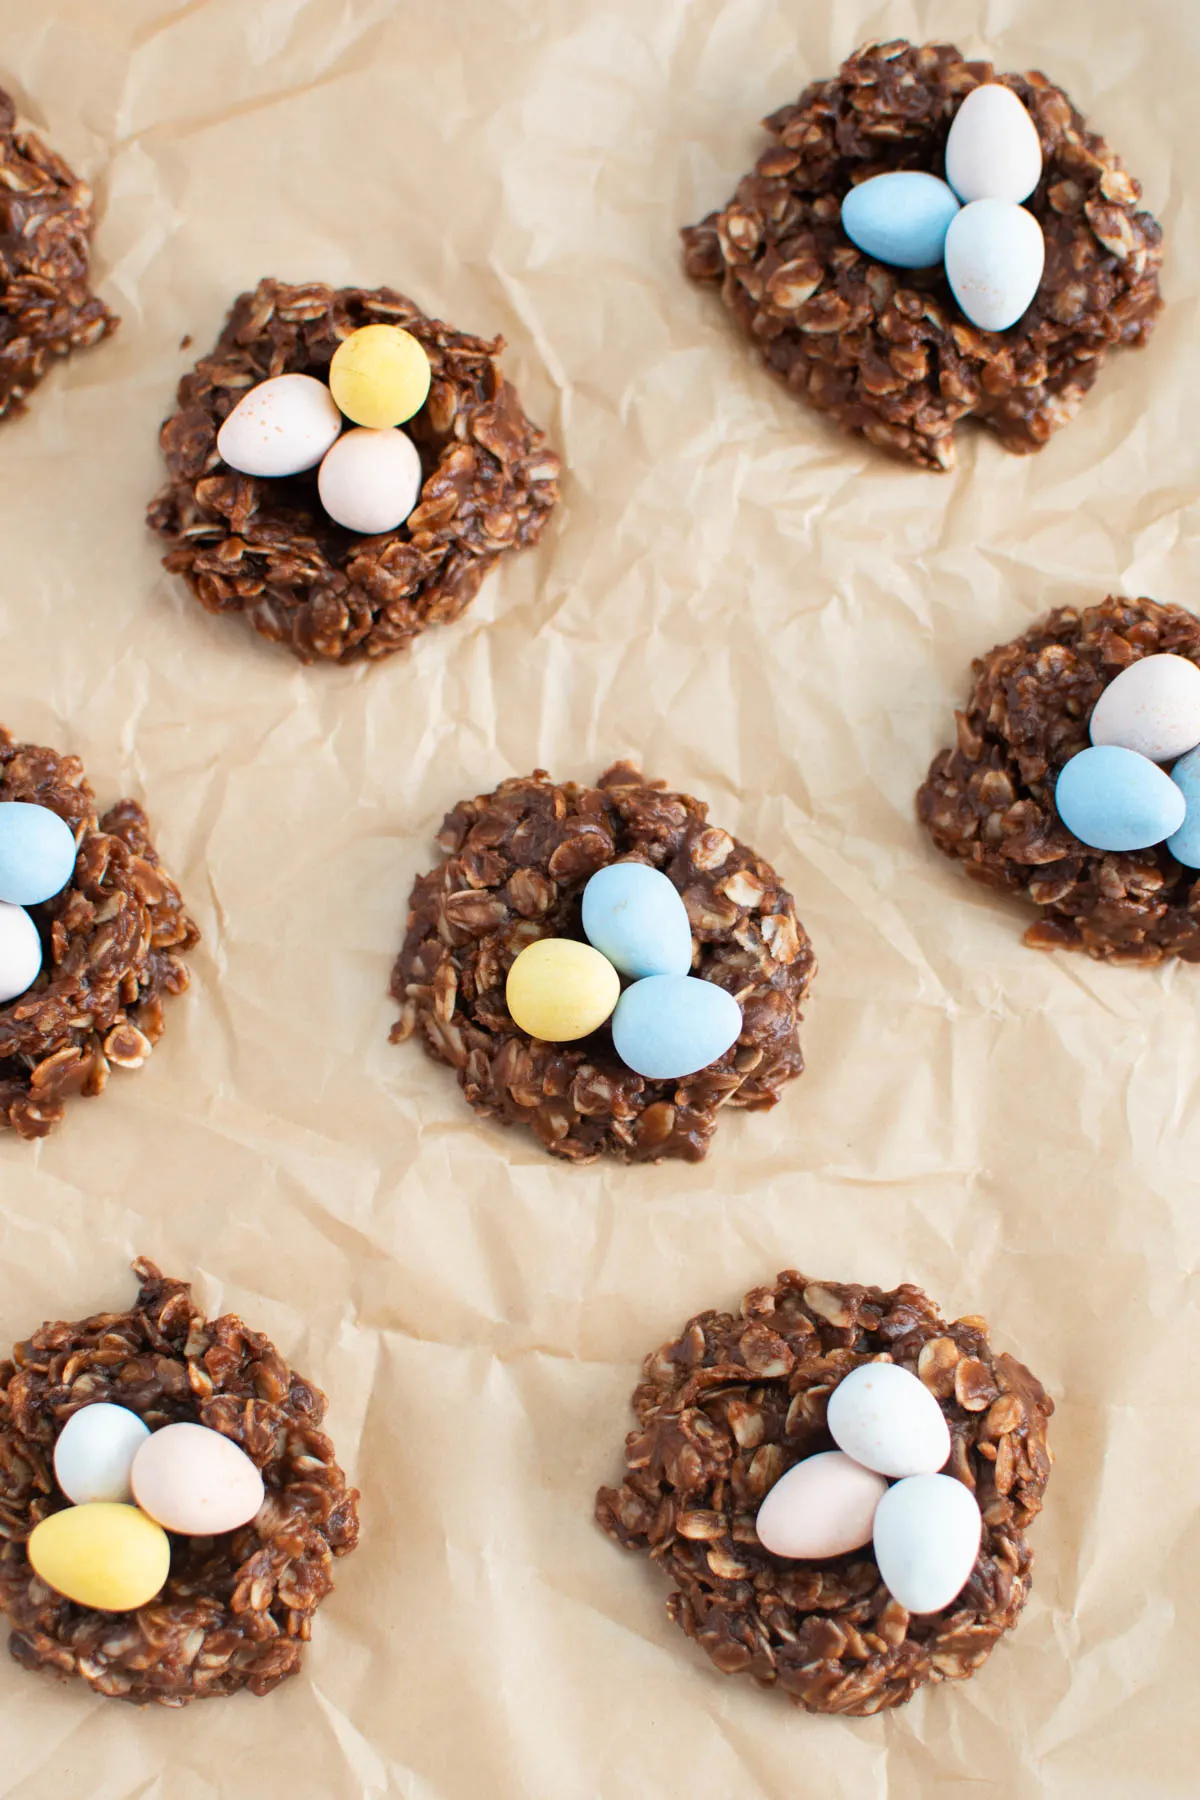 Several no bake nest cookies filled with chocolate eggs on crumpled parchment paper.